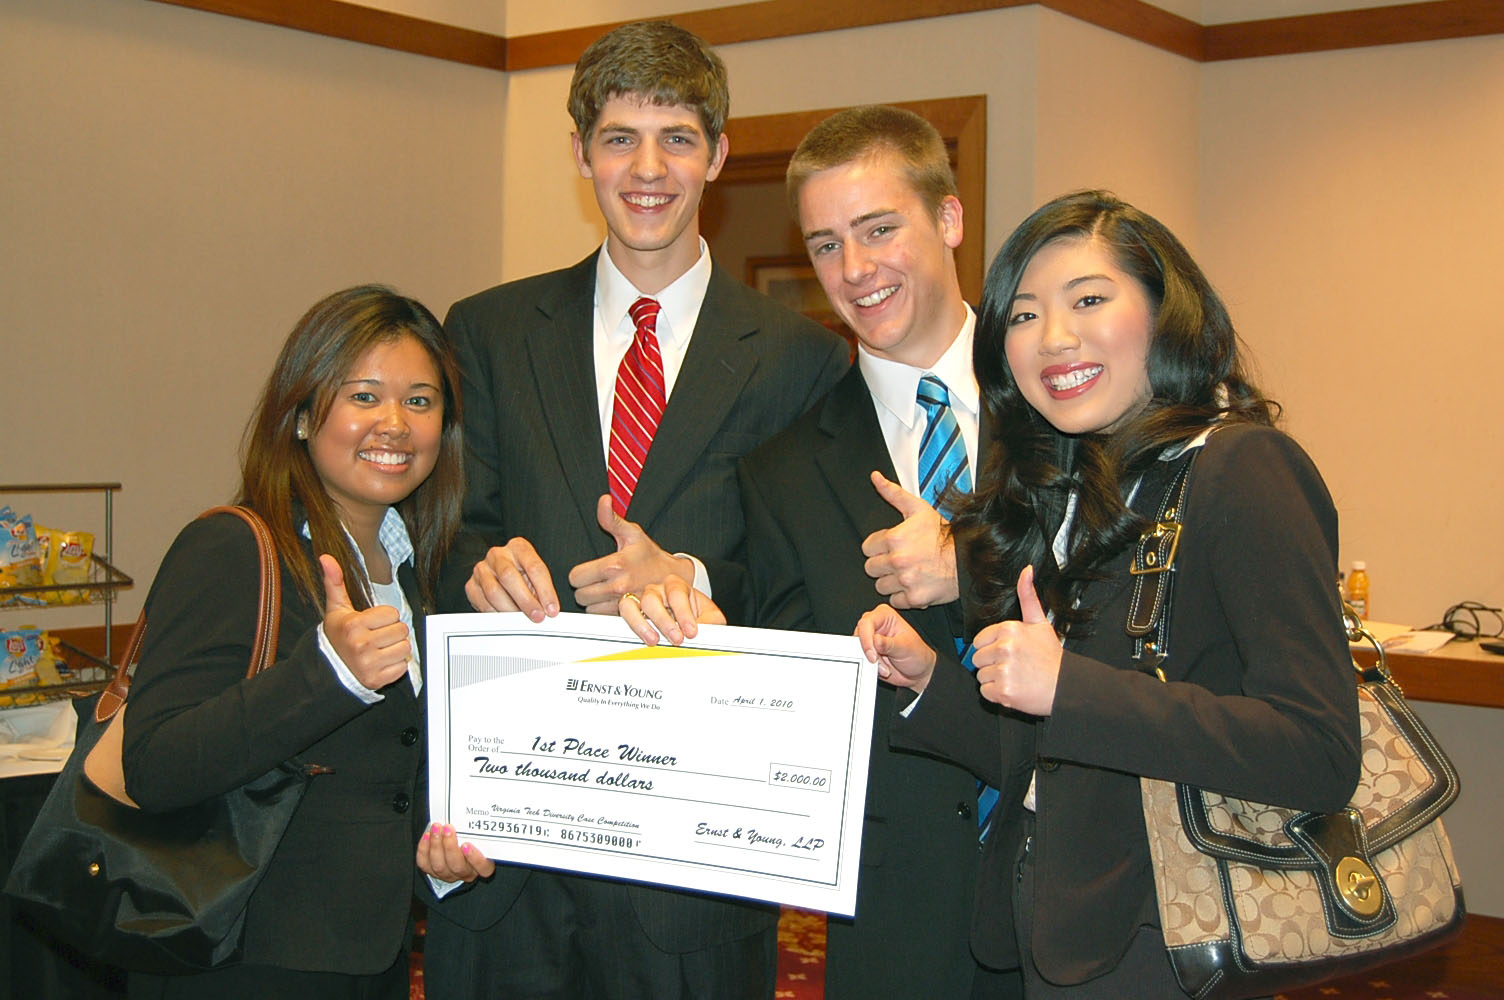 Diversity case competition winners, from left to right are Sunny Senedara, Sam Banks, Ian Hamre, and Denise Kee.